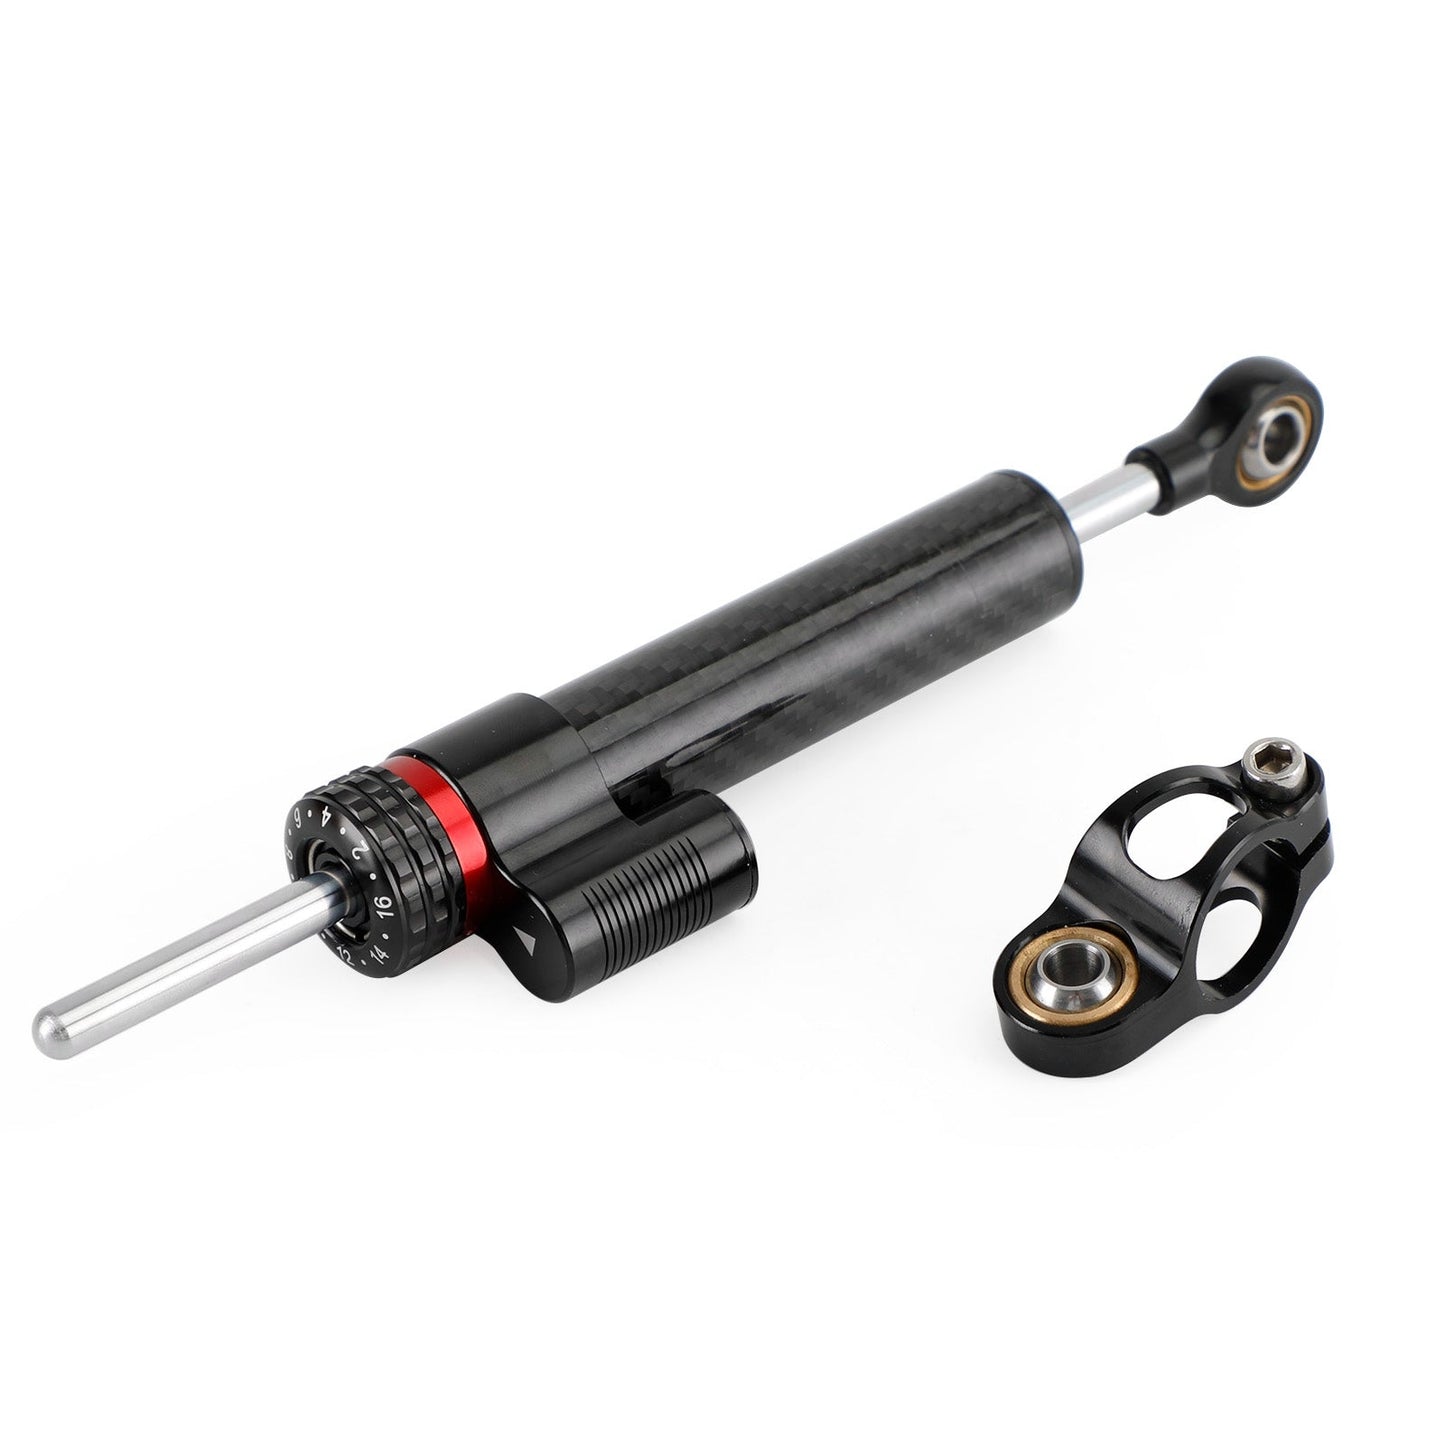 CNC Universal Adjustable Steering Damper Stabilizer For Motorcycle Accessories